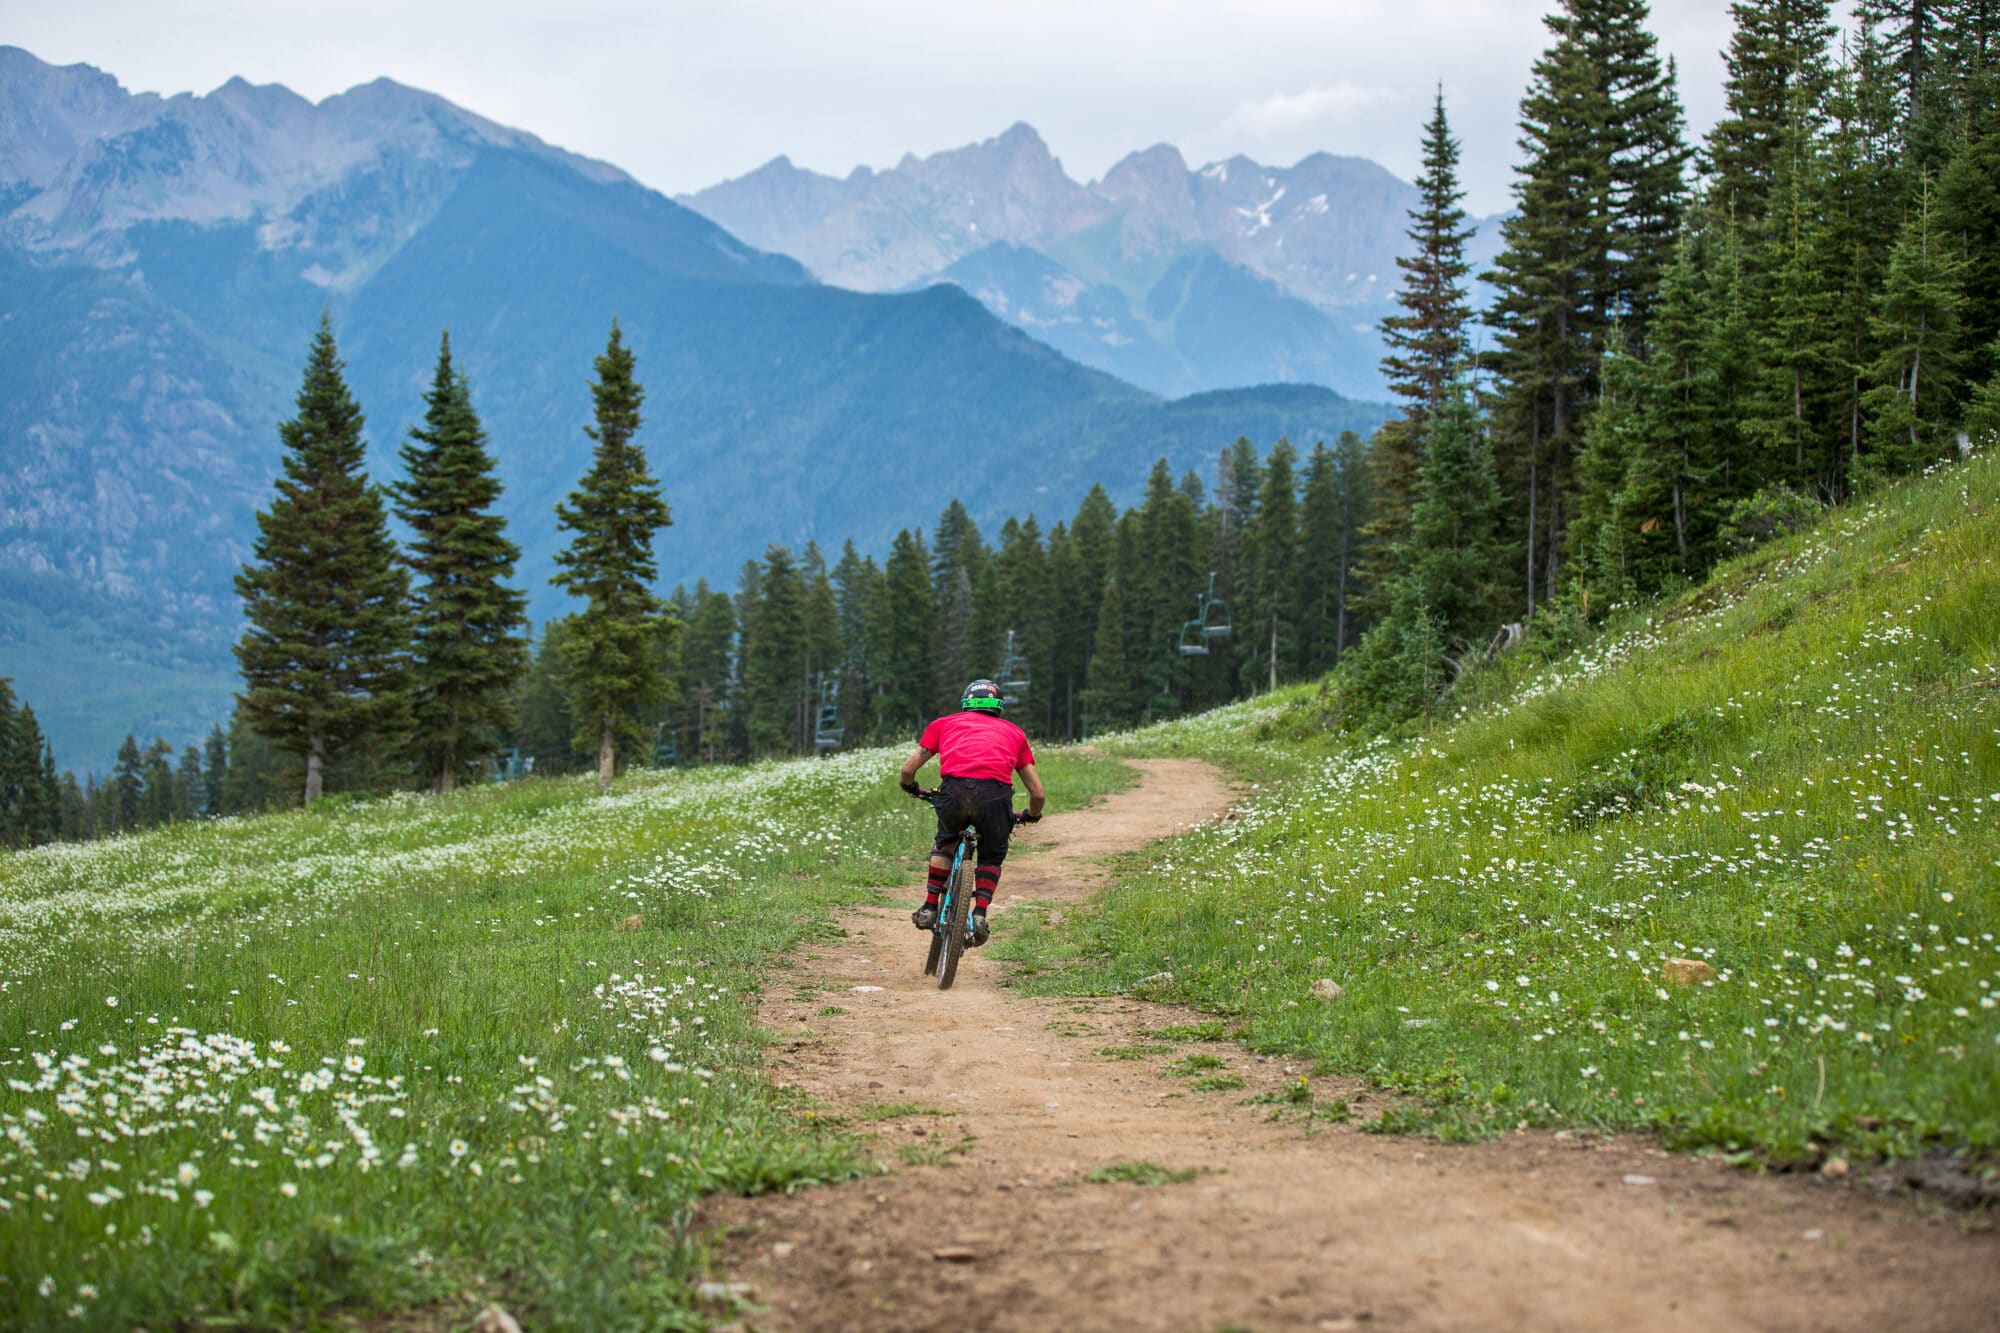 Mountain bike rides downhill with views of the needles range